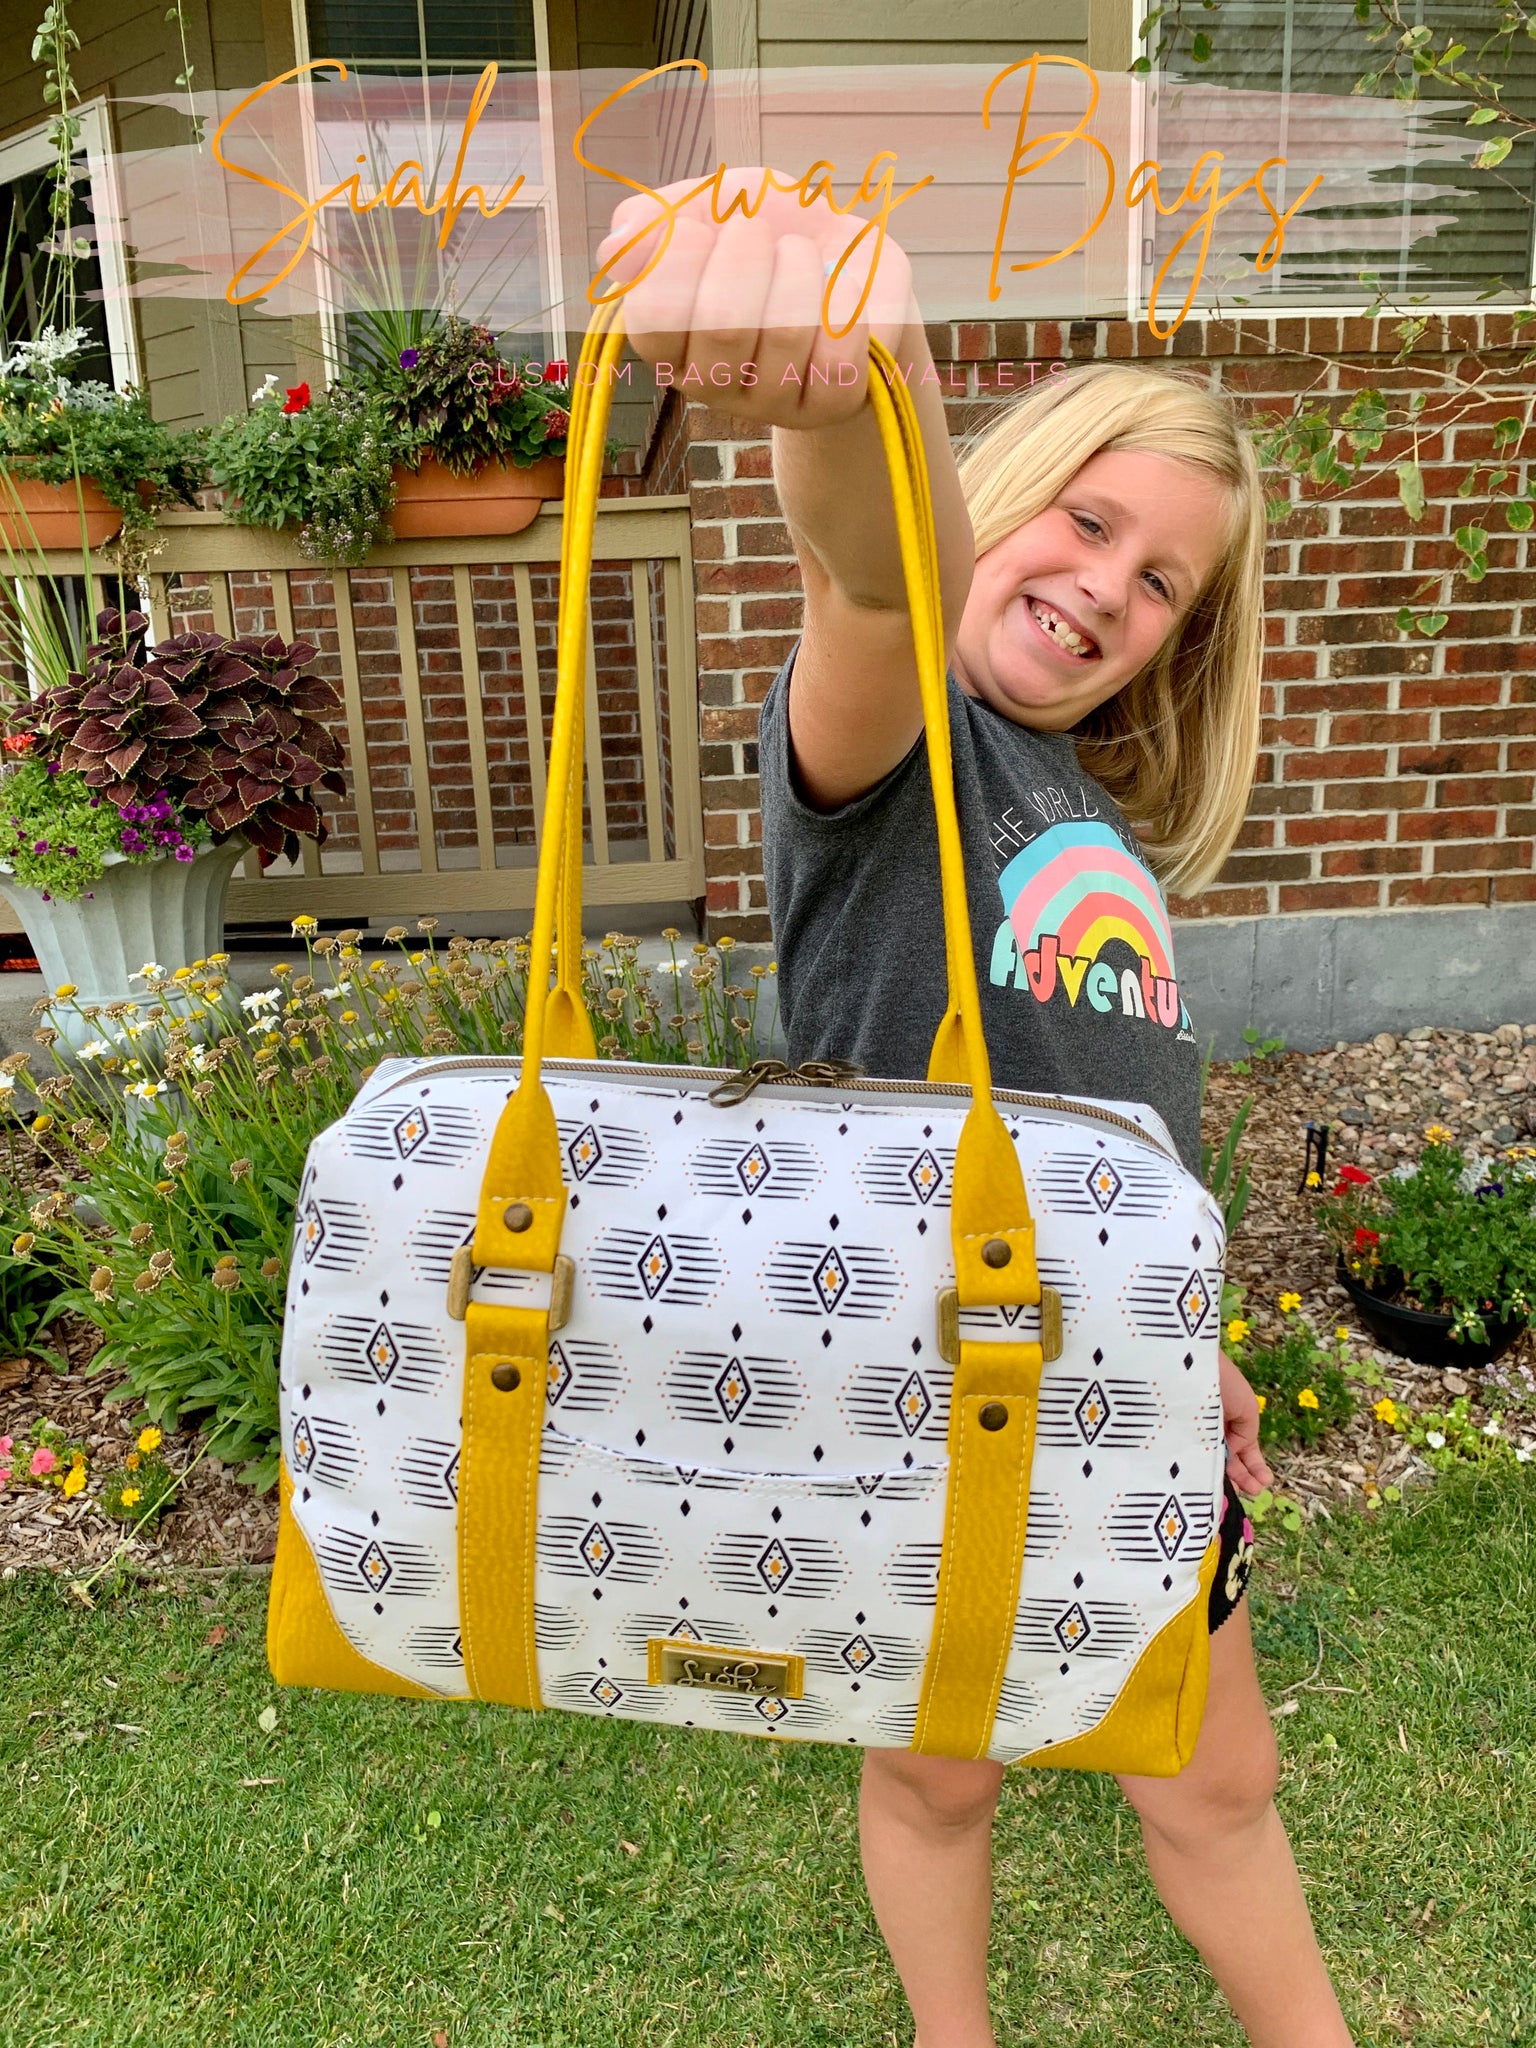 Totes / Purses patterns - Leather hub patterns and templates